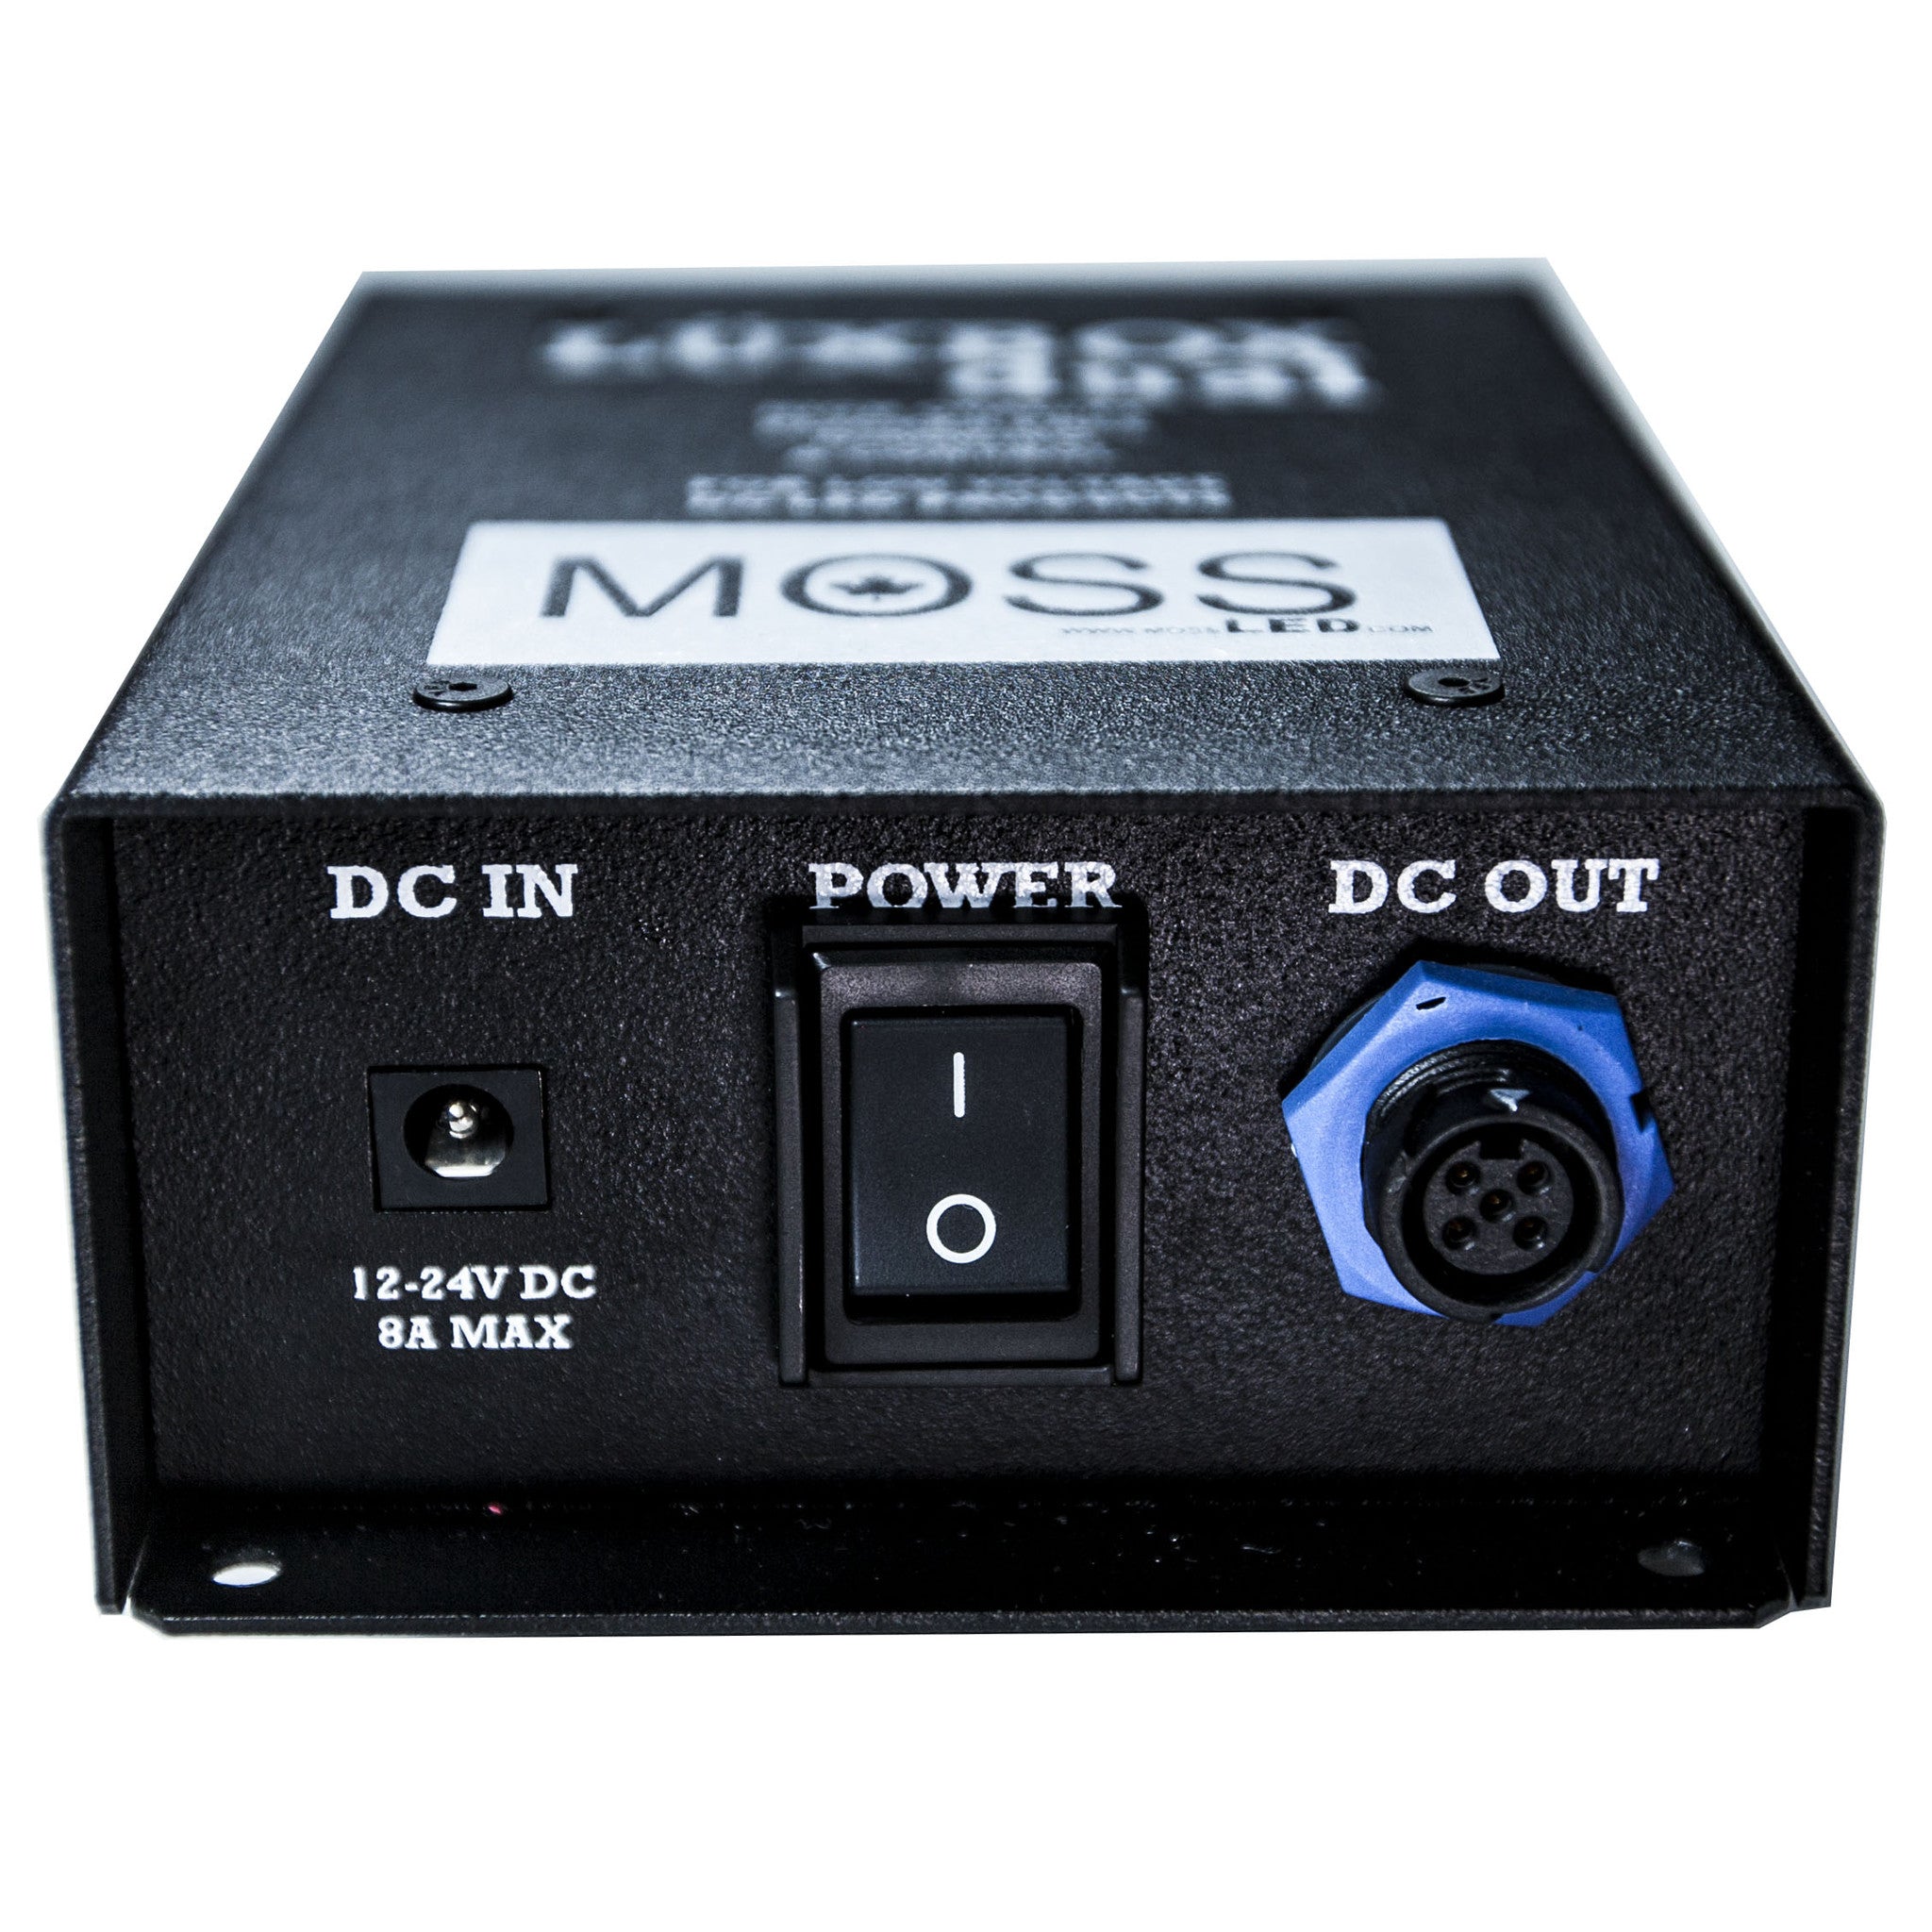 DISCONTINUED LUXBOX dual - 2 Channel Control * DISCONTINUED * LUXBOX DUAL - 2 Channel Control